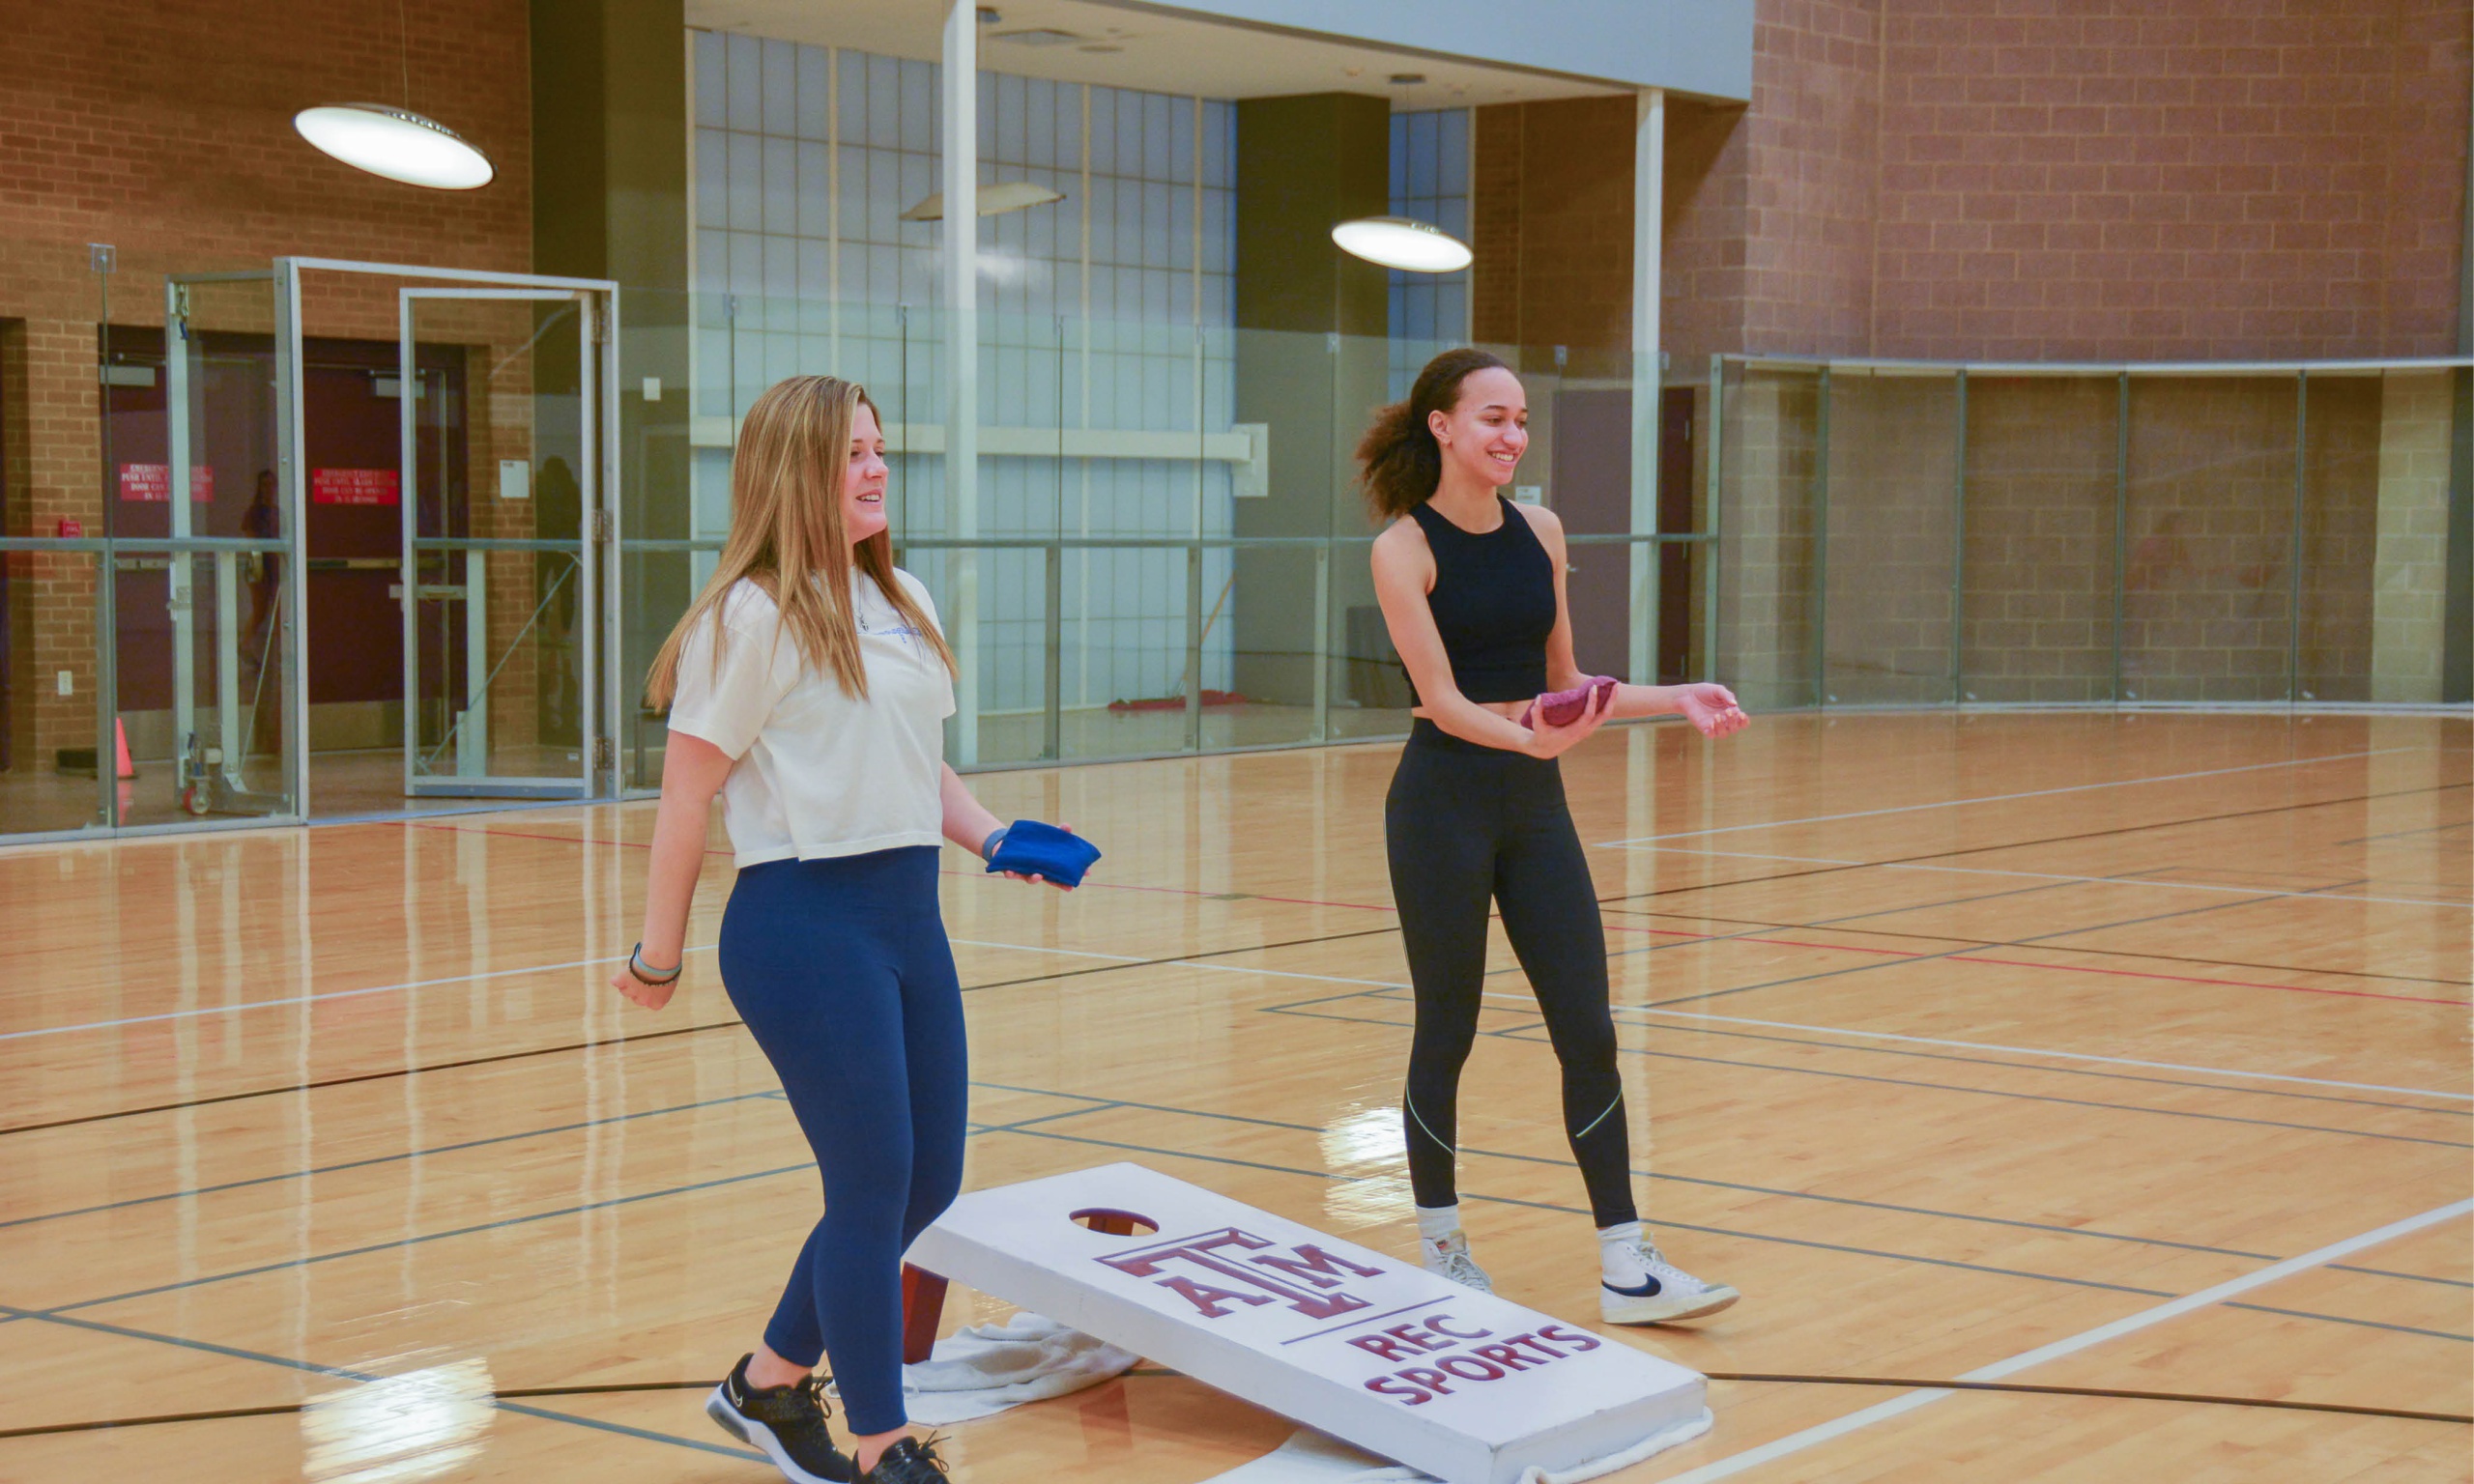 Two women engaged in a game of cornhole on a basketball court, showcasing their skills and enjoying a friendly competition.